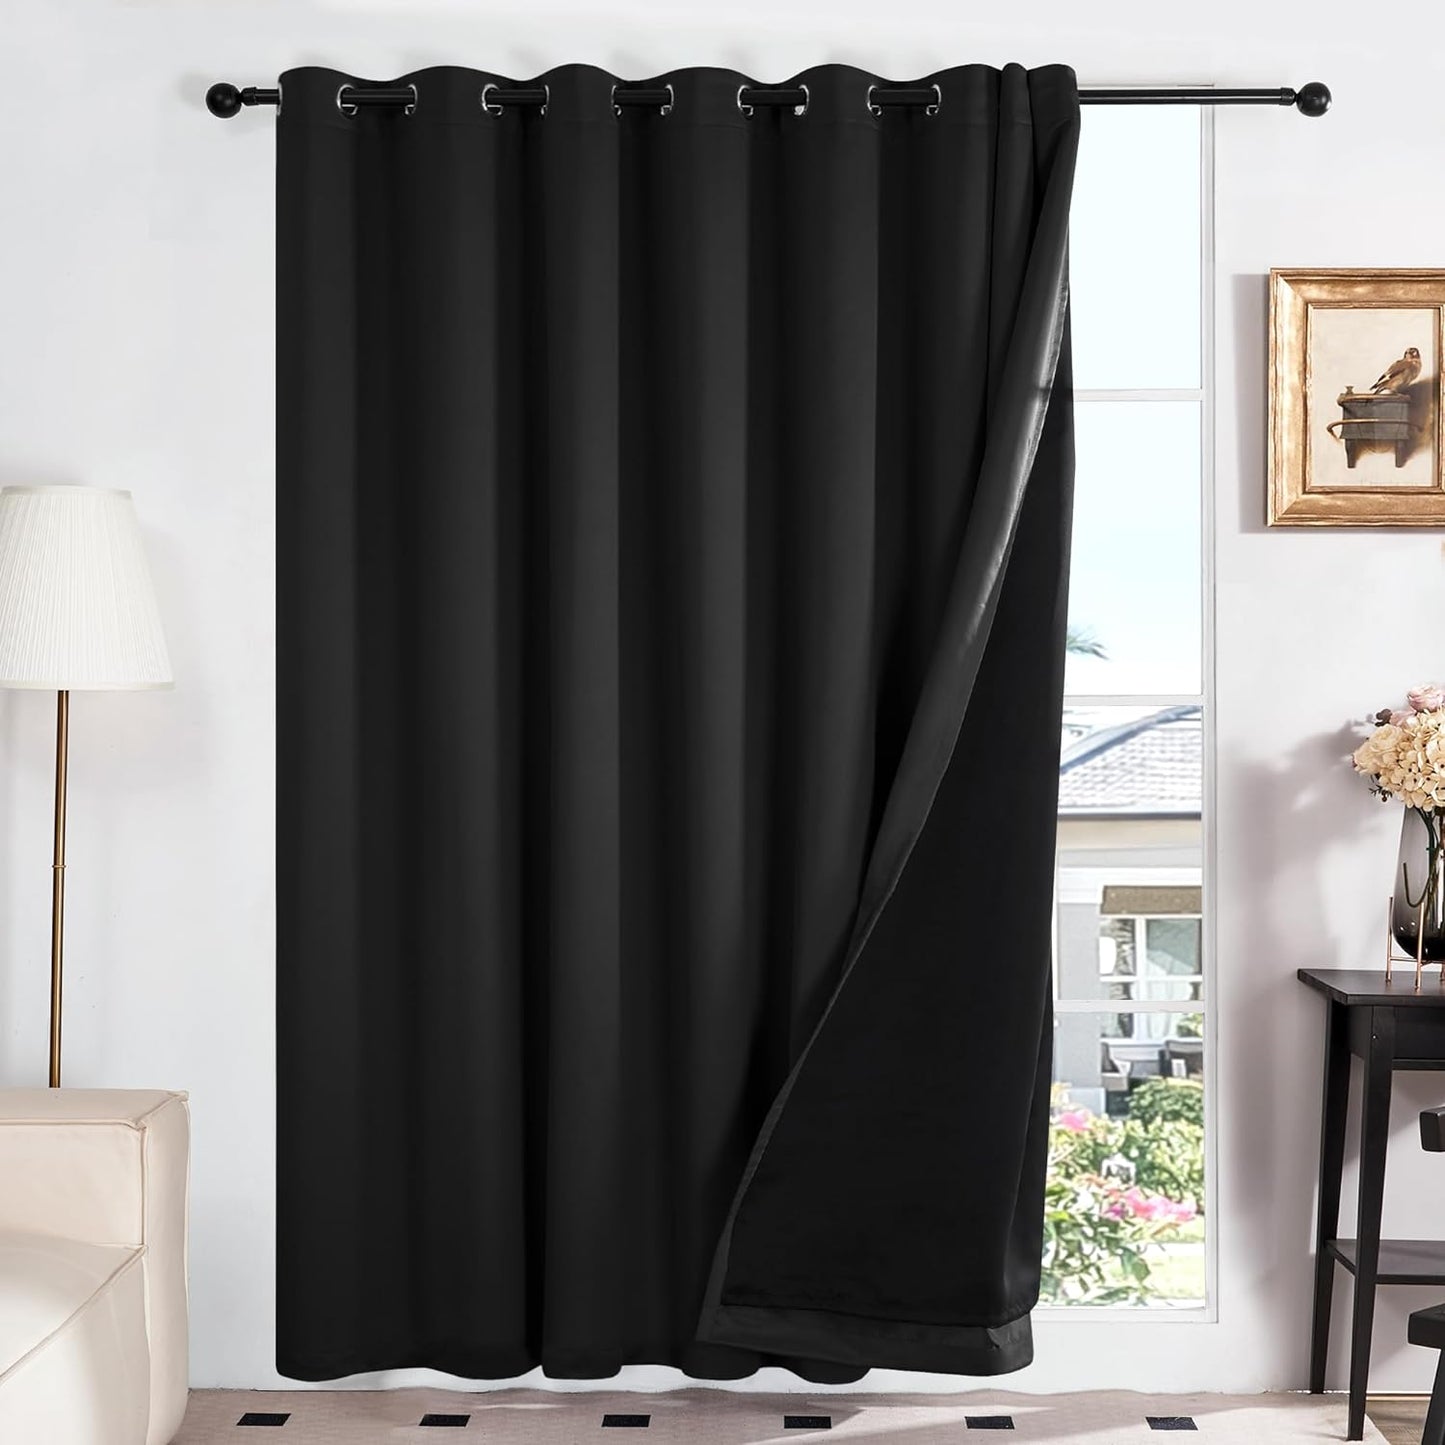 Deconovo 100% White Blackout Curtains, Double Layer Sliding Door Curtain for Living Room, Extra Wide Room Divder Curtains for Patio Door (100W X 84L Inches, Pure White, 1 Panel)  DECONOVO Black 100W X 95L Inch 